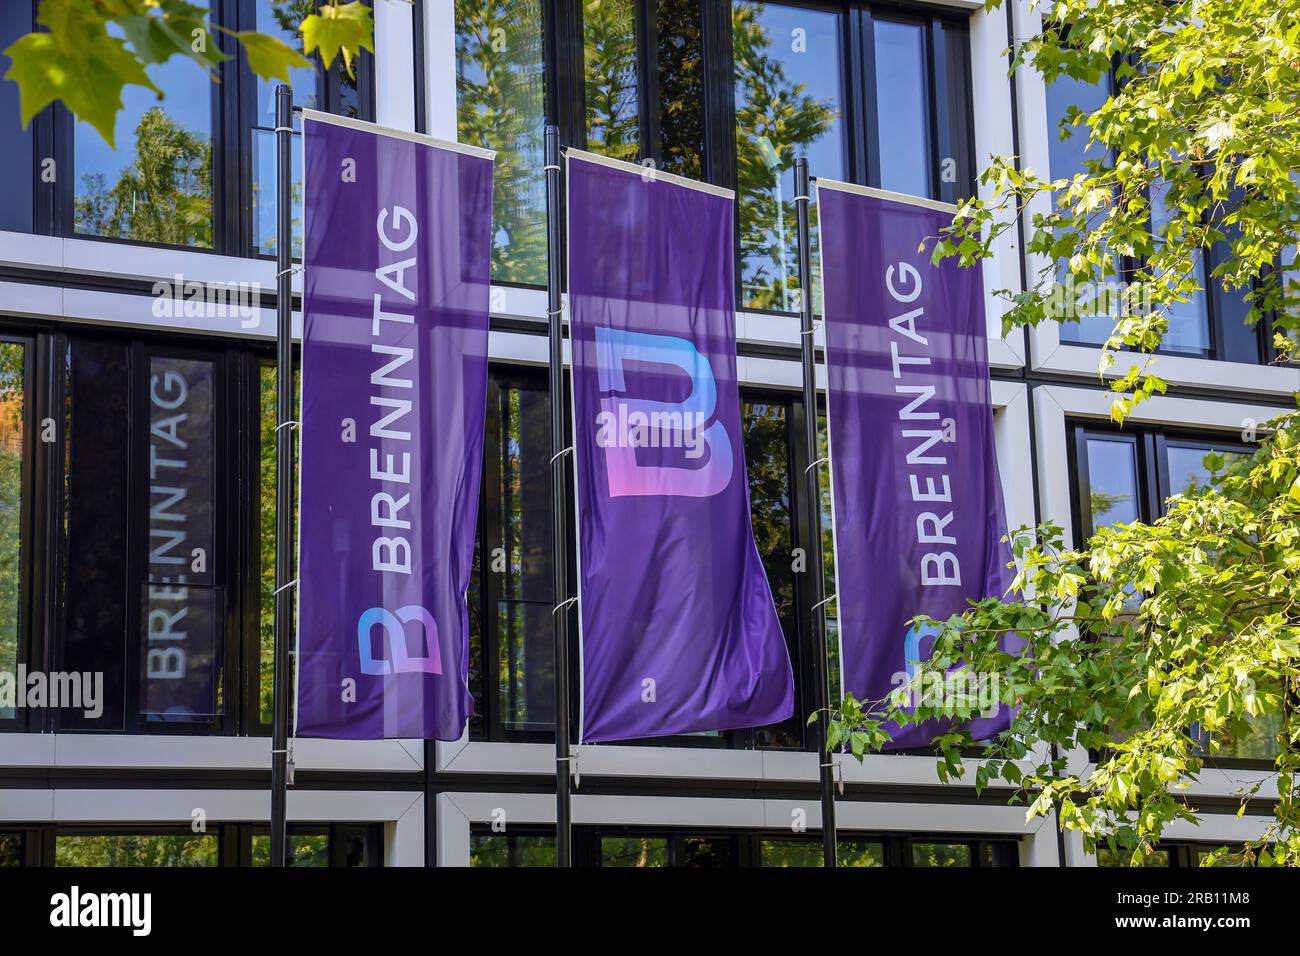 Essen, North Rhine-Westphalia, Germany - Brenntag, company logo on flags in front of the facade of the Brenntag headquarters, the company is the world market leader in the distribution of chemicals and ingredients Stock Photo